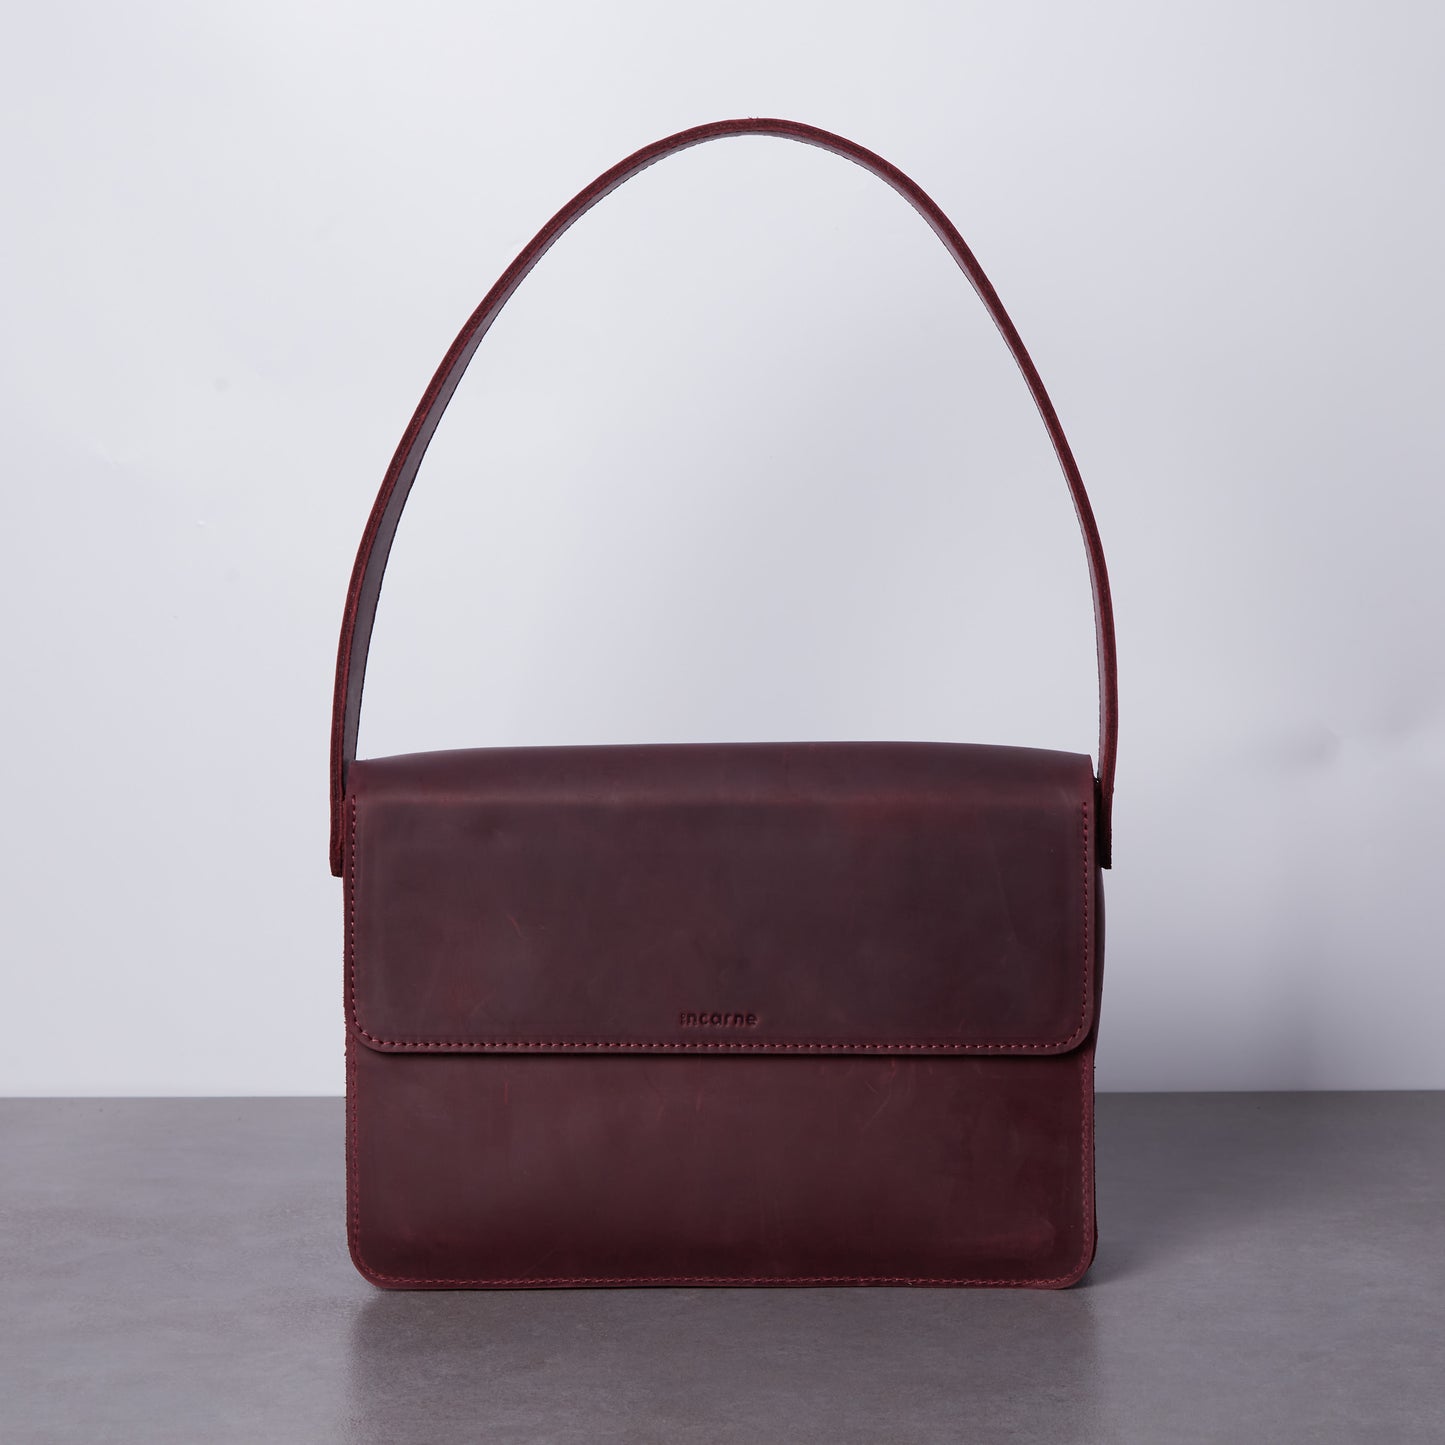 leather bag for women in burgundy color